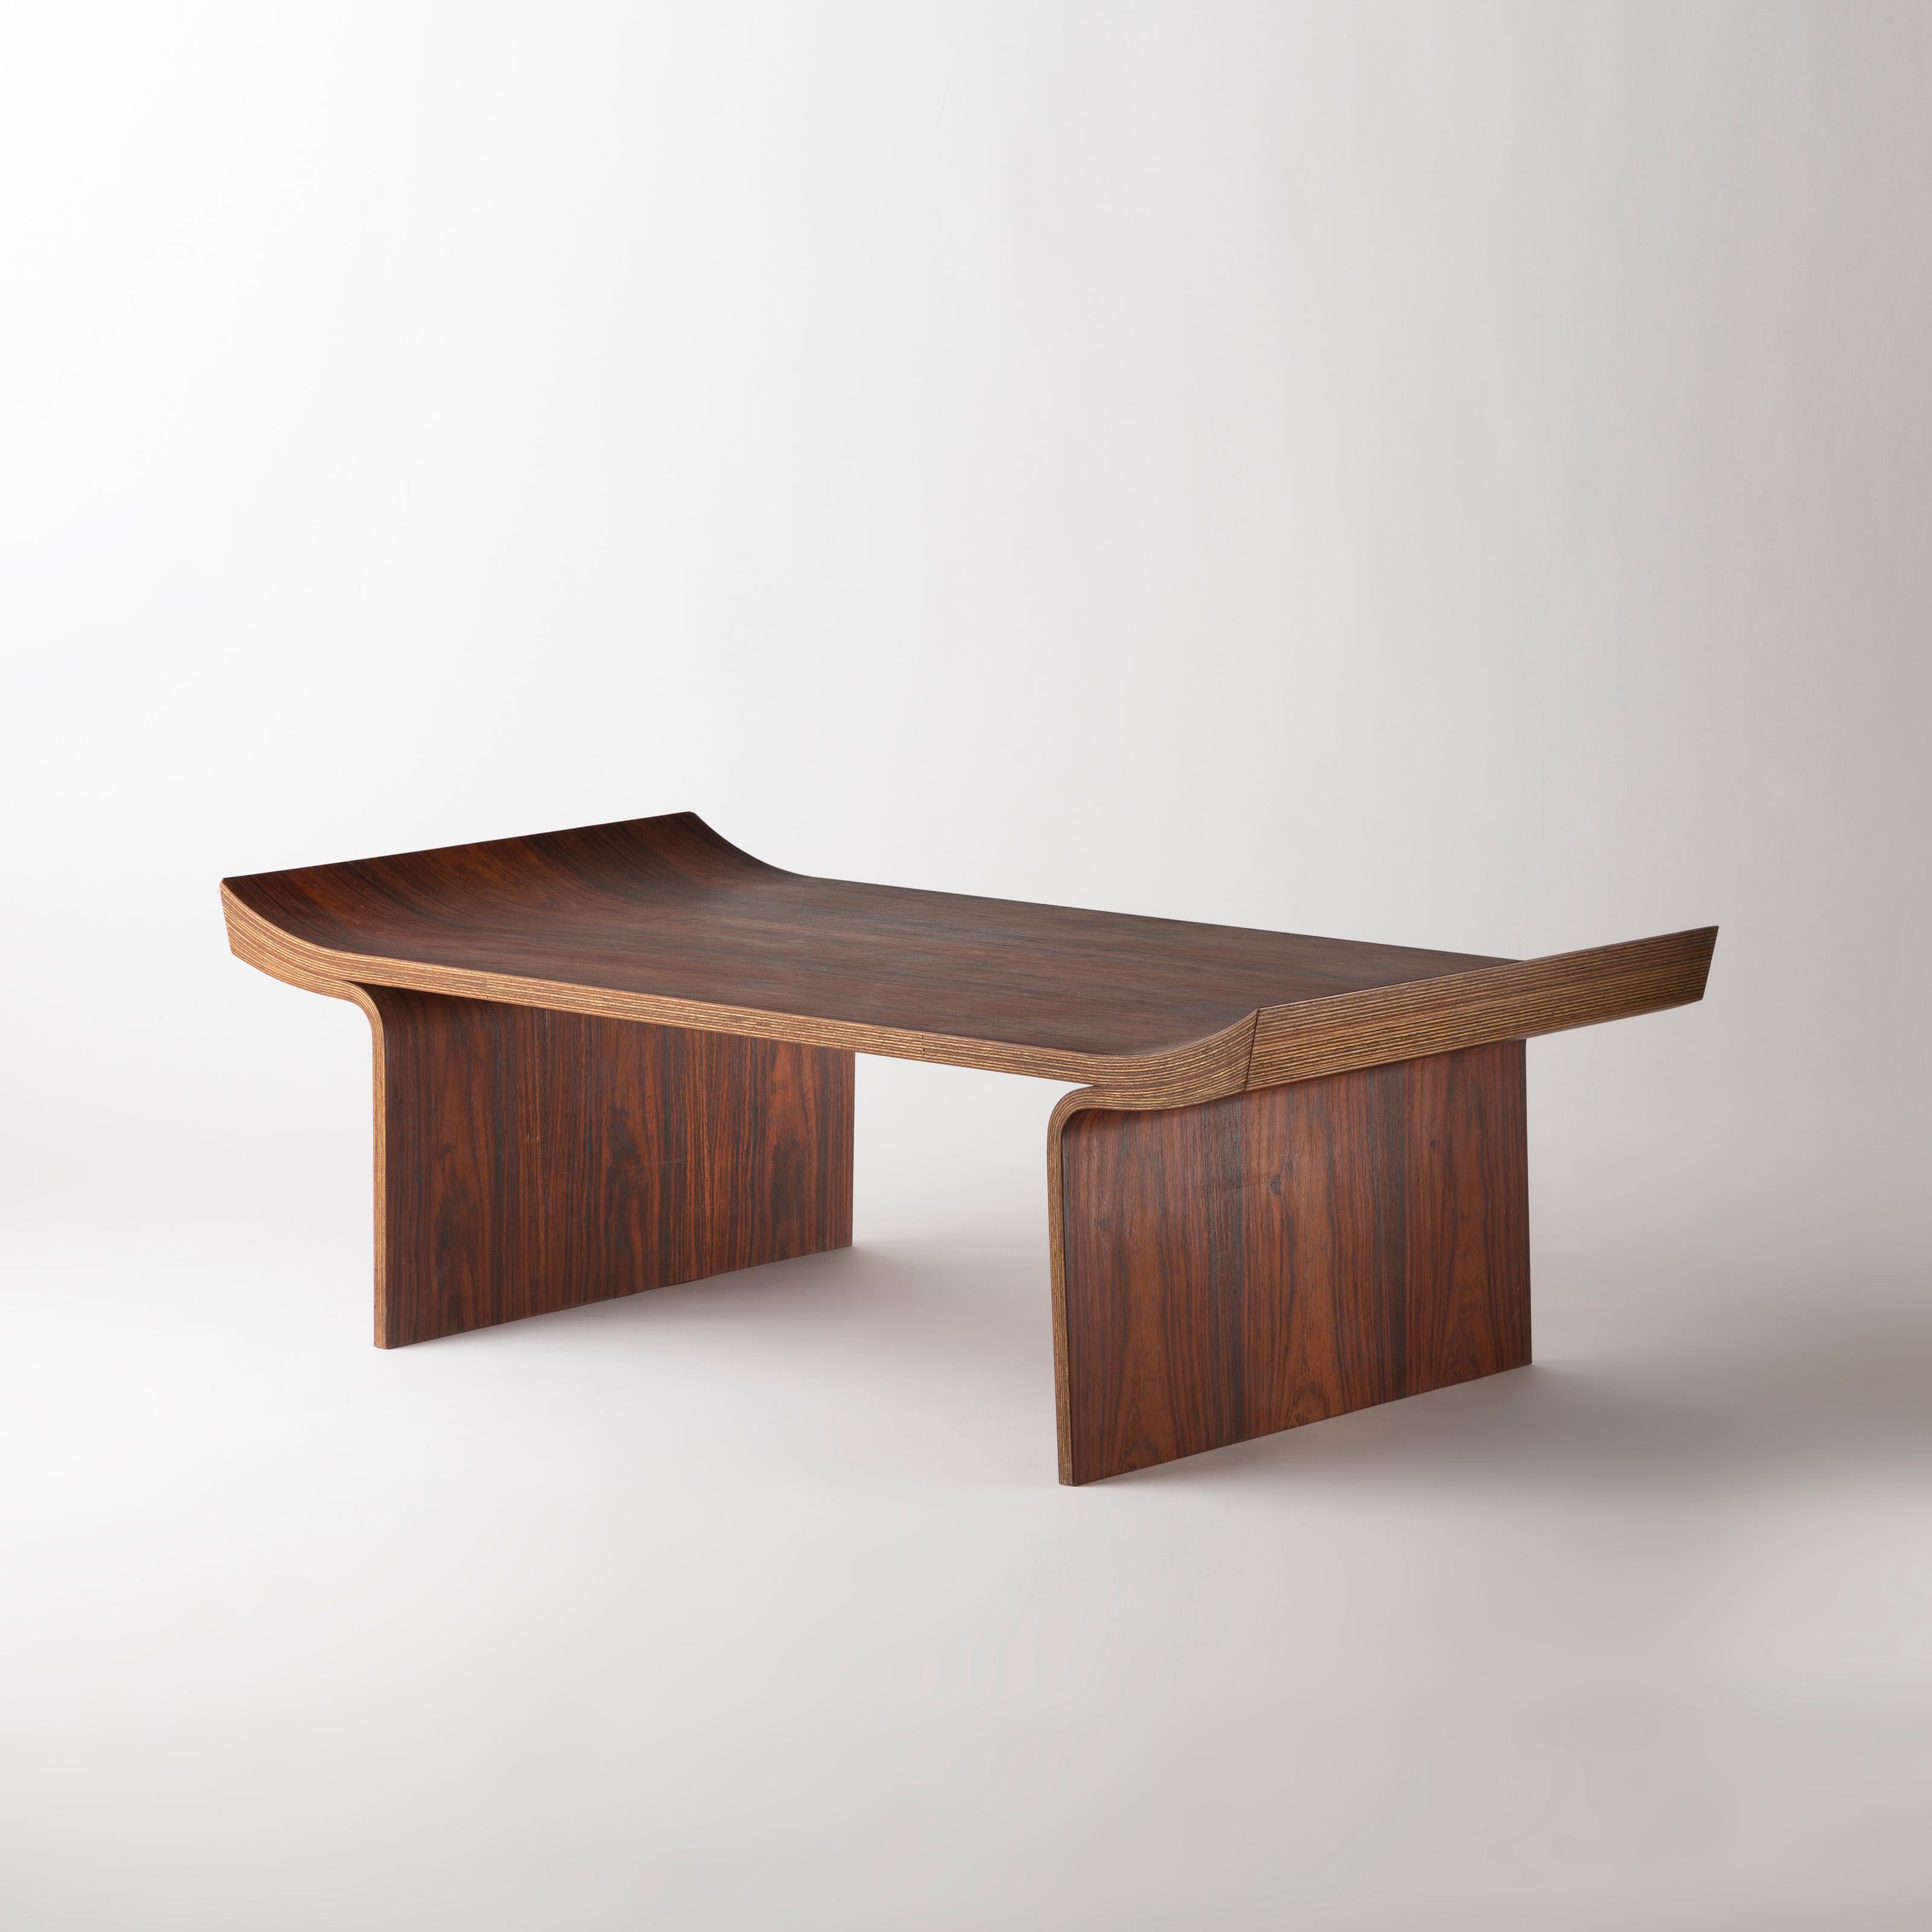 A coffee table or a bench made of plywood, manufactured by Tendo Mokko, Japan, circa 1950.